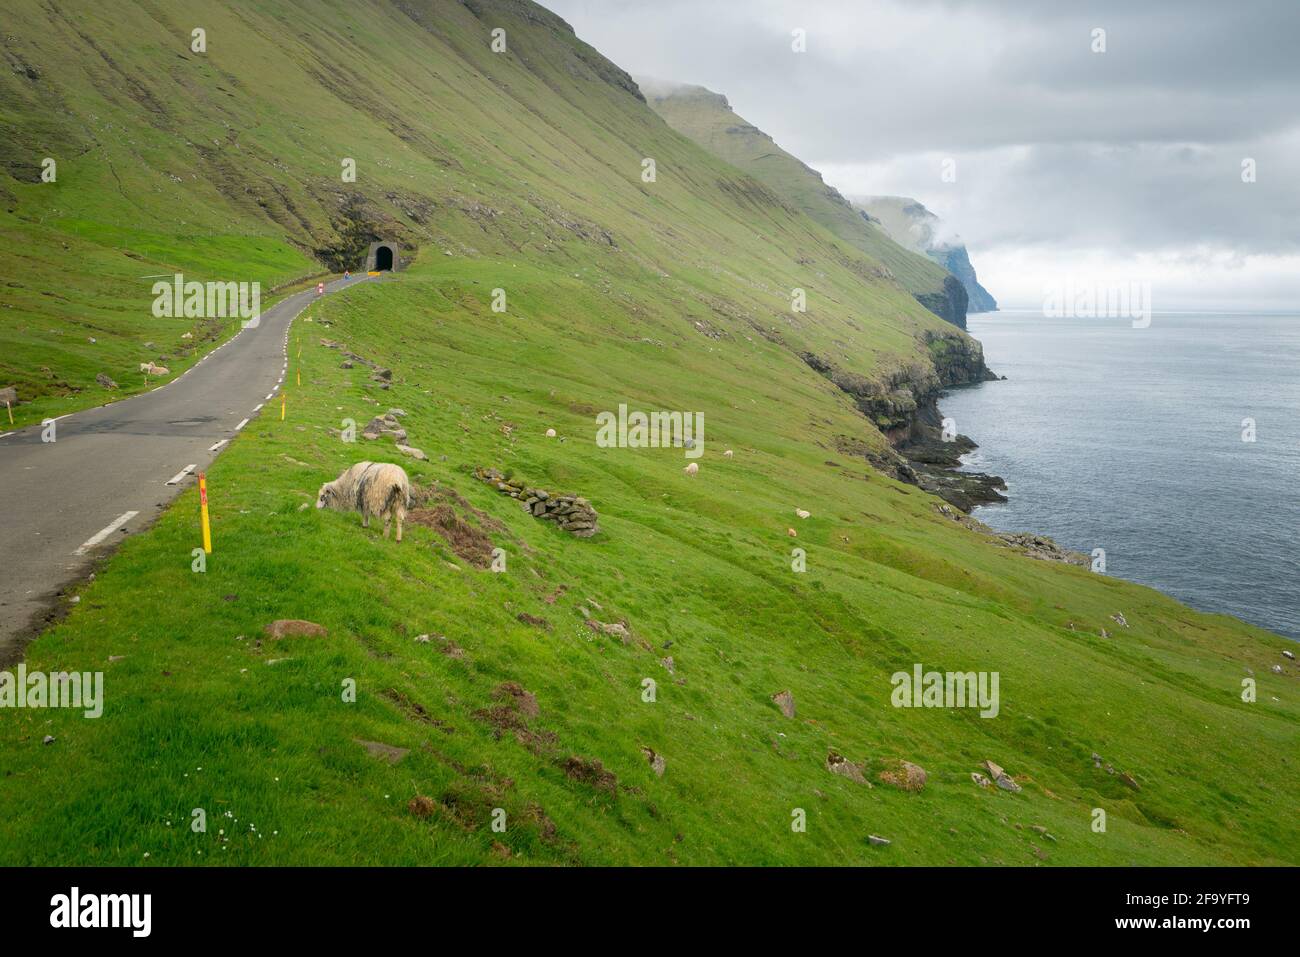 Narrow road leading into a tunnel on a steep slope of Kalsoy, Faroe Islans. Sheep feeding on grass next to the road. Ocean and cloudy sky. Distant hor Stock Photo